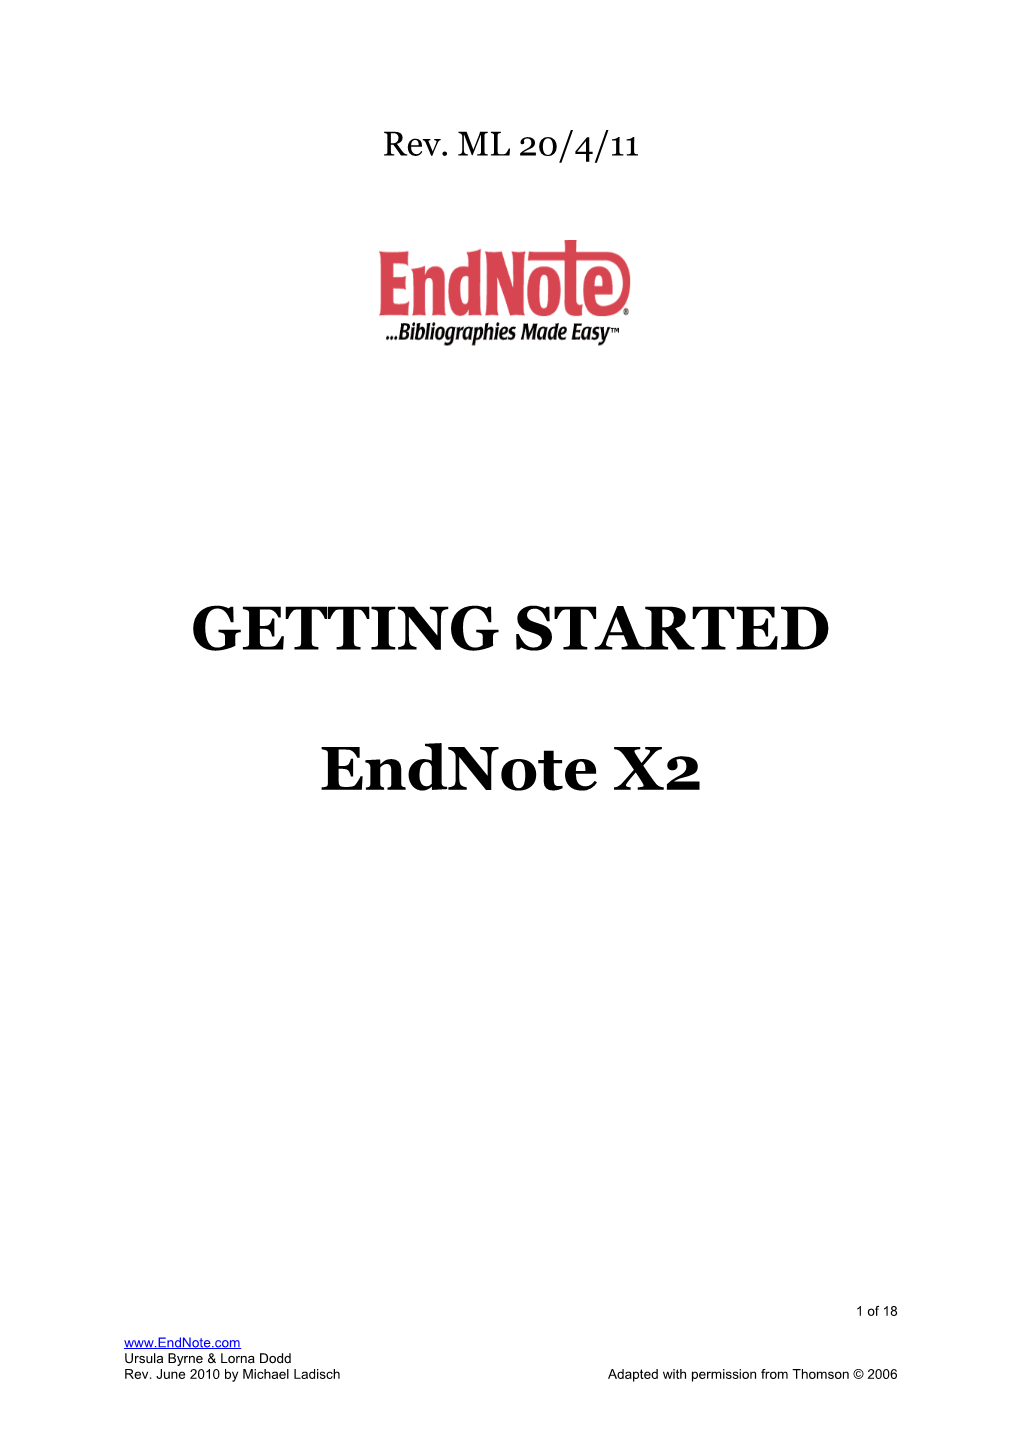 2. Creating & Adding Records to Your Endnote Library